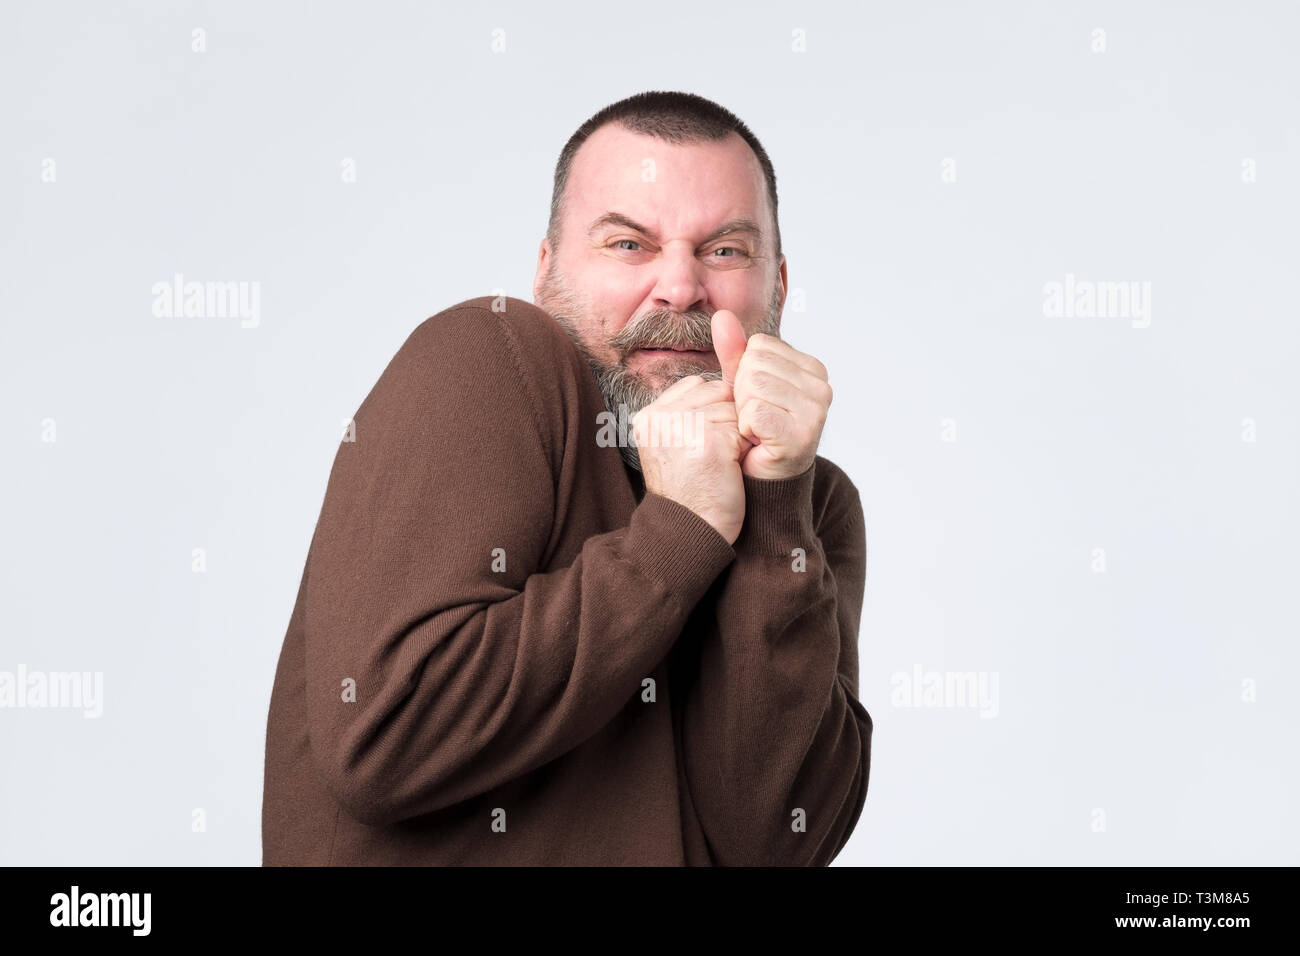 Frightened mature man with expression of fear on face. Stock Photo